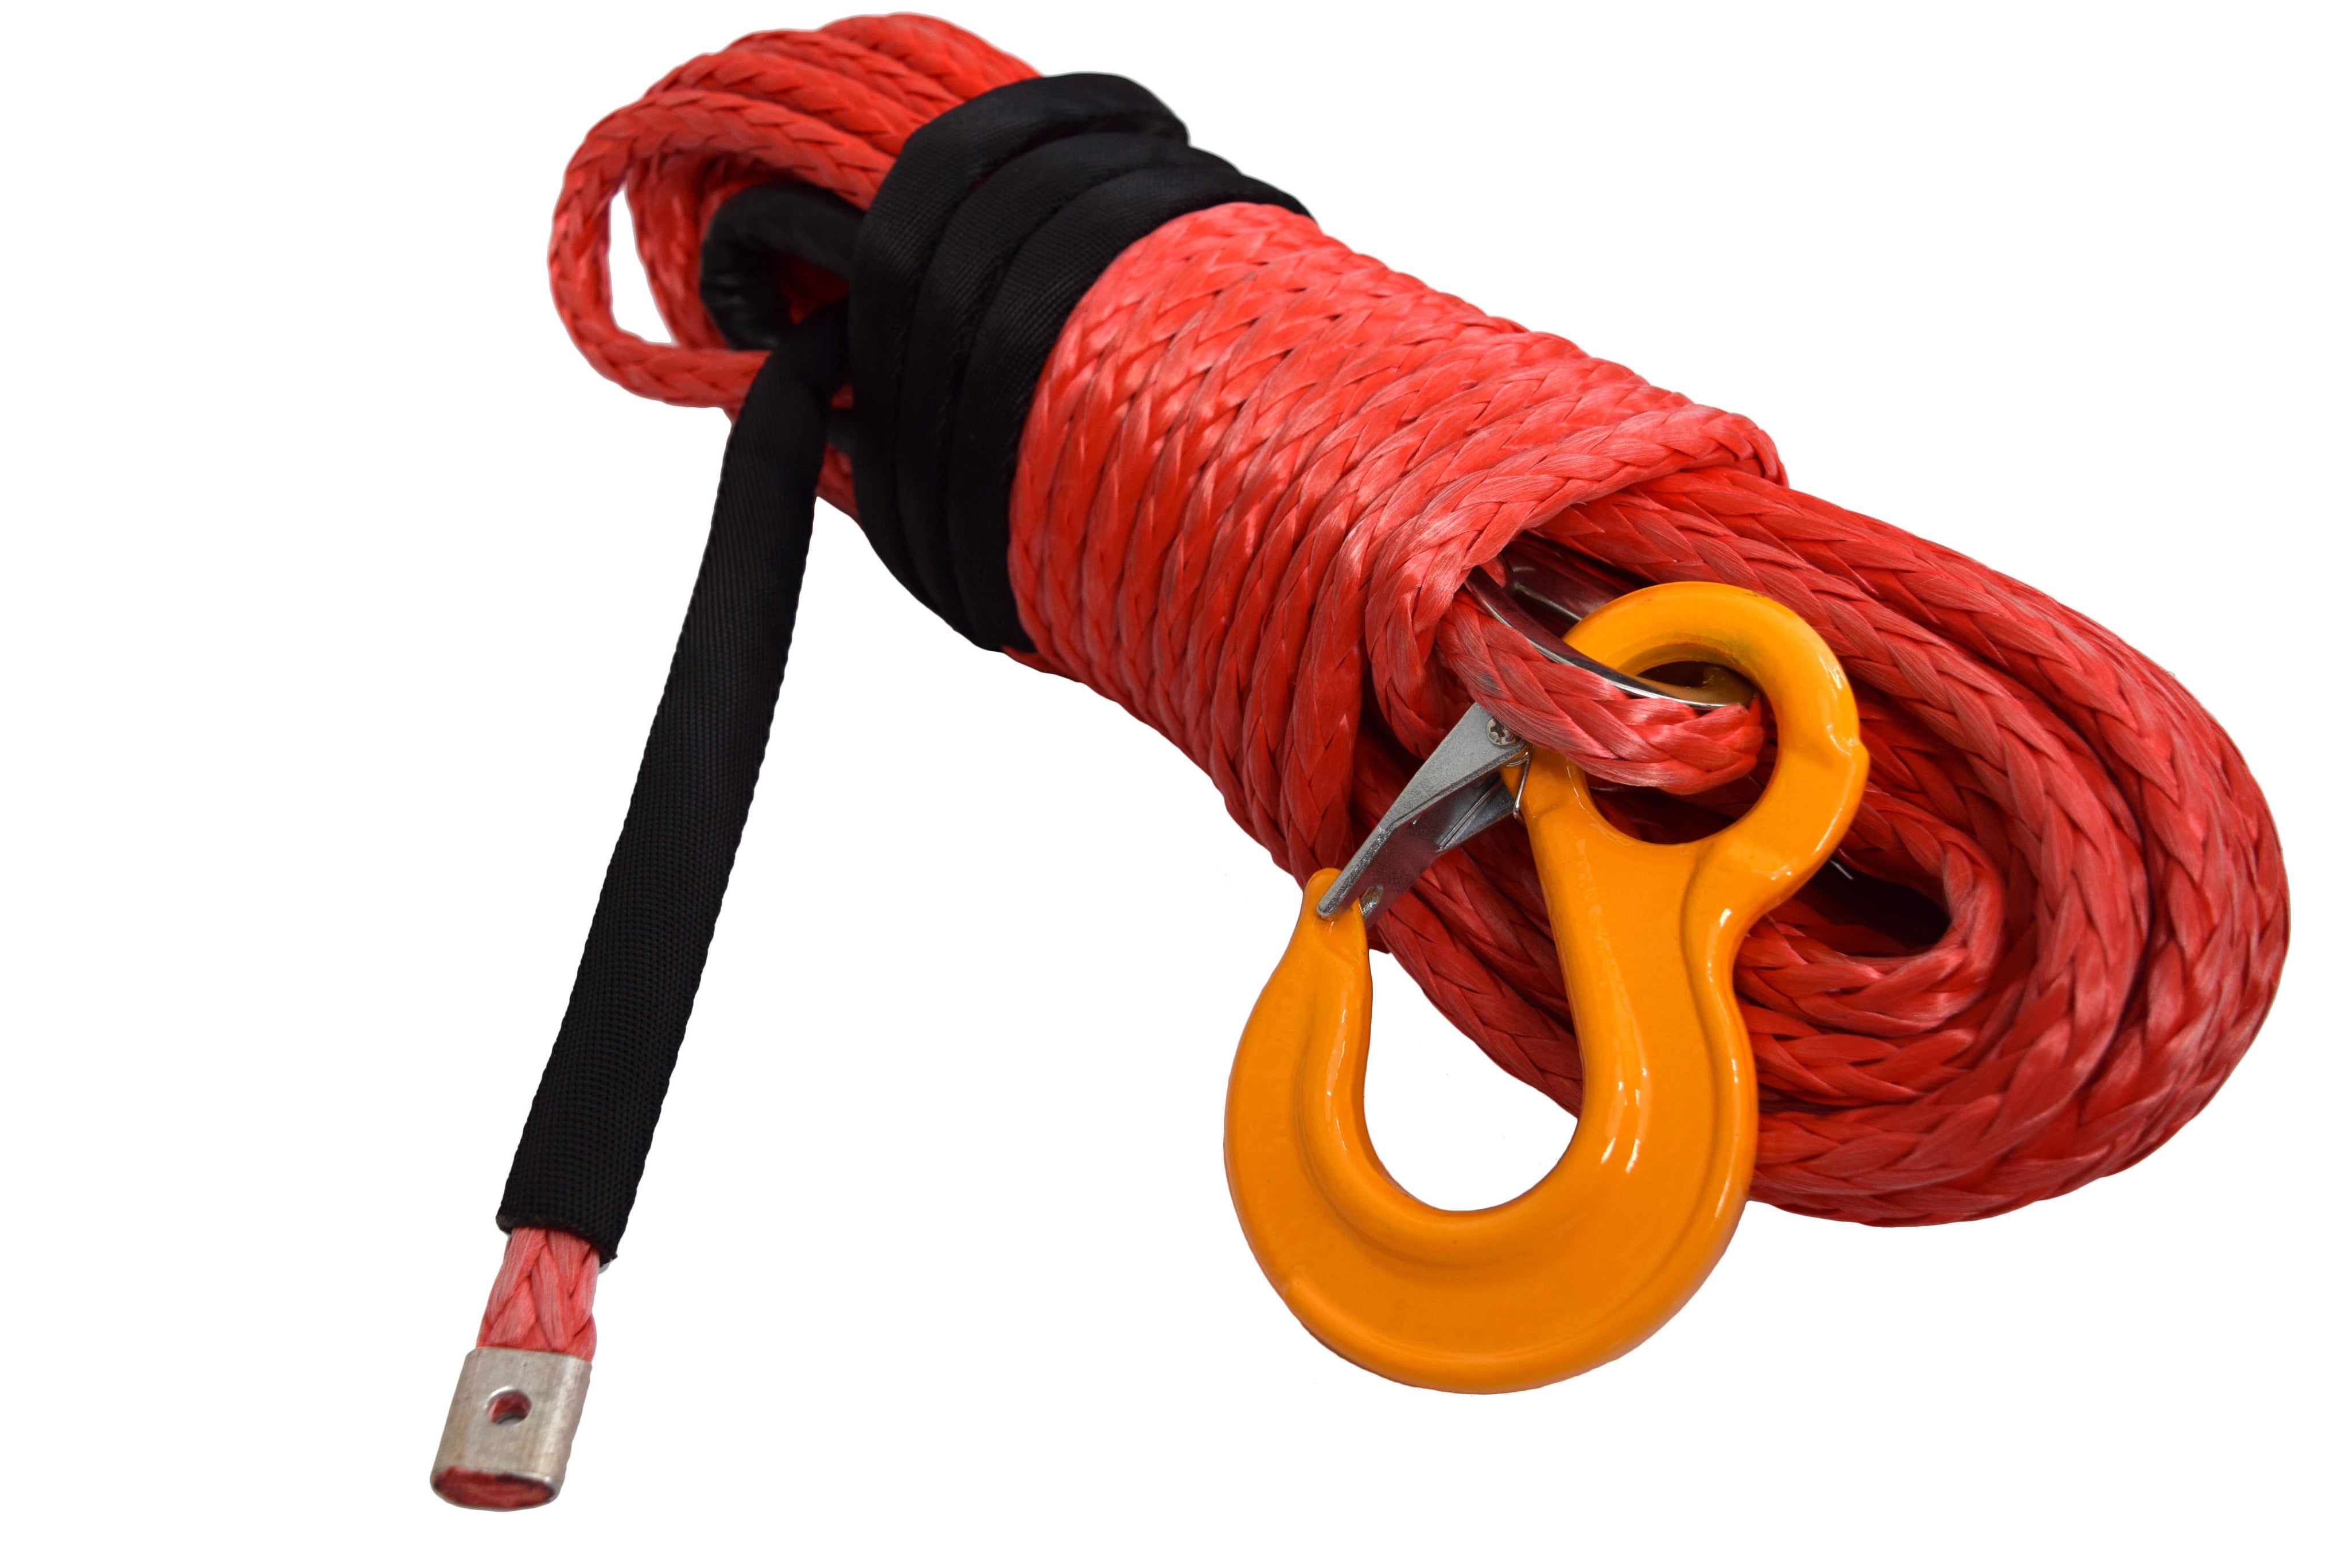 QIQU red 100 ft 1/2 inch SUV Off-road car synthetic winch cable rope line with hook and lug